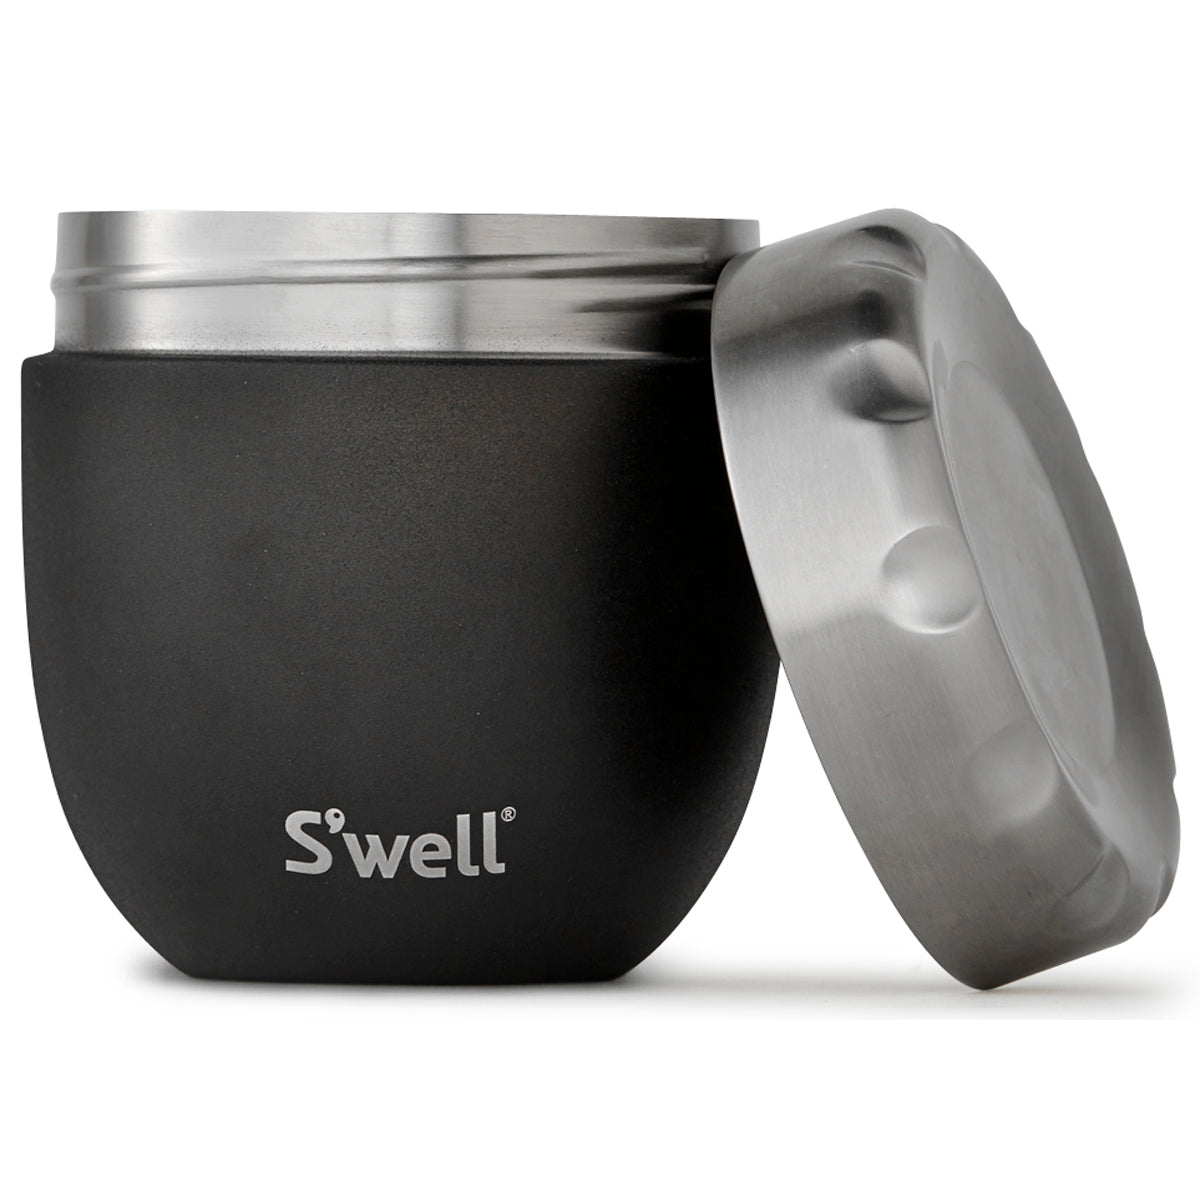 S'well Stainless Steel Food Bowls, S'well Eats Food Bowl